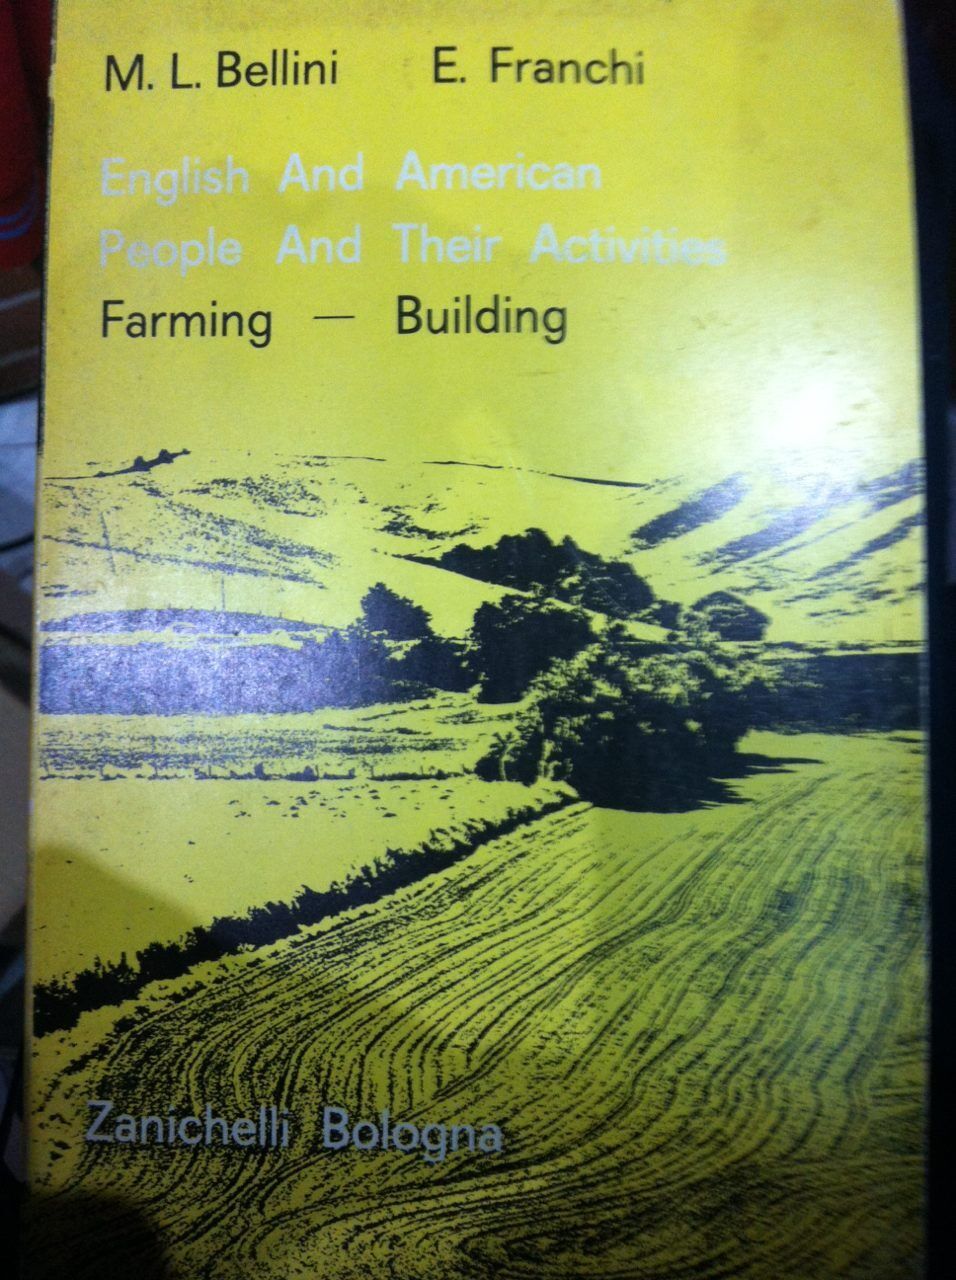 English and american people and their activities Farming-Building - Bellini- lo